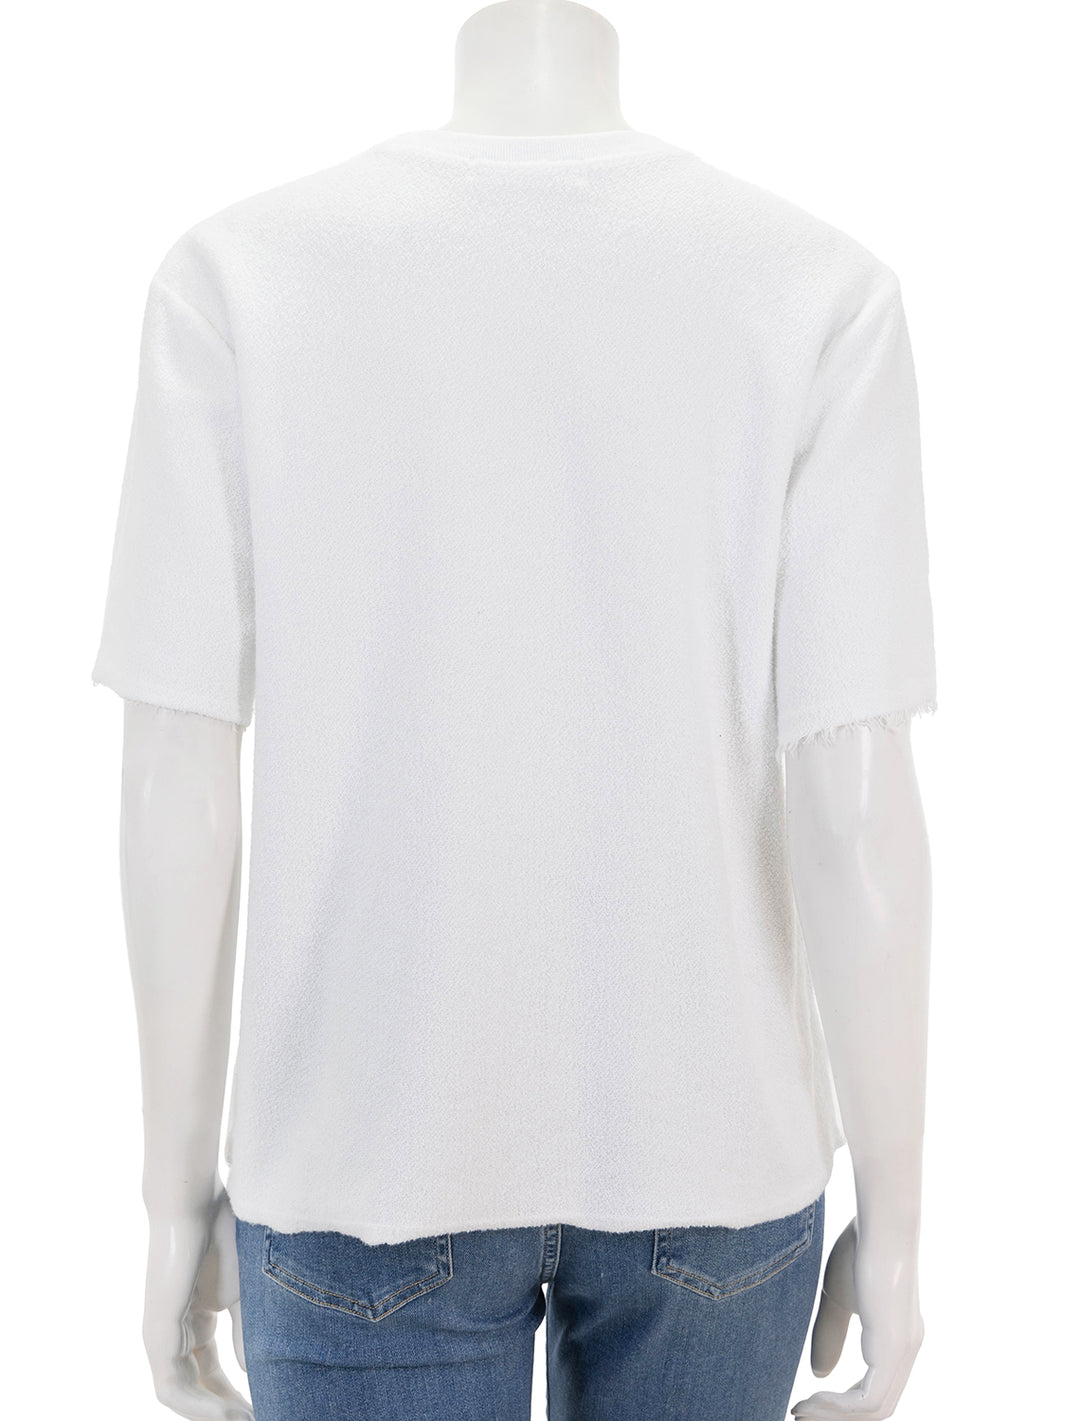 Back view of Perfectwhitetee's demi french terry t-shirt in white.